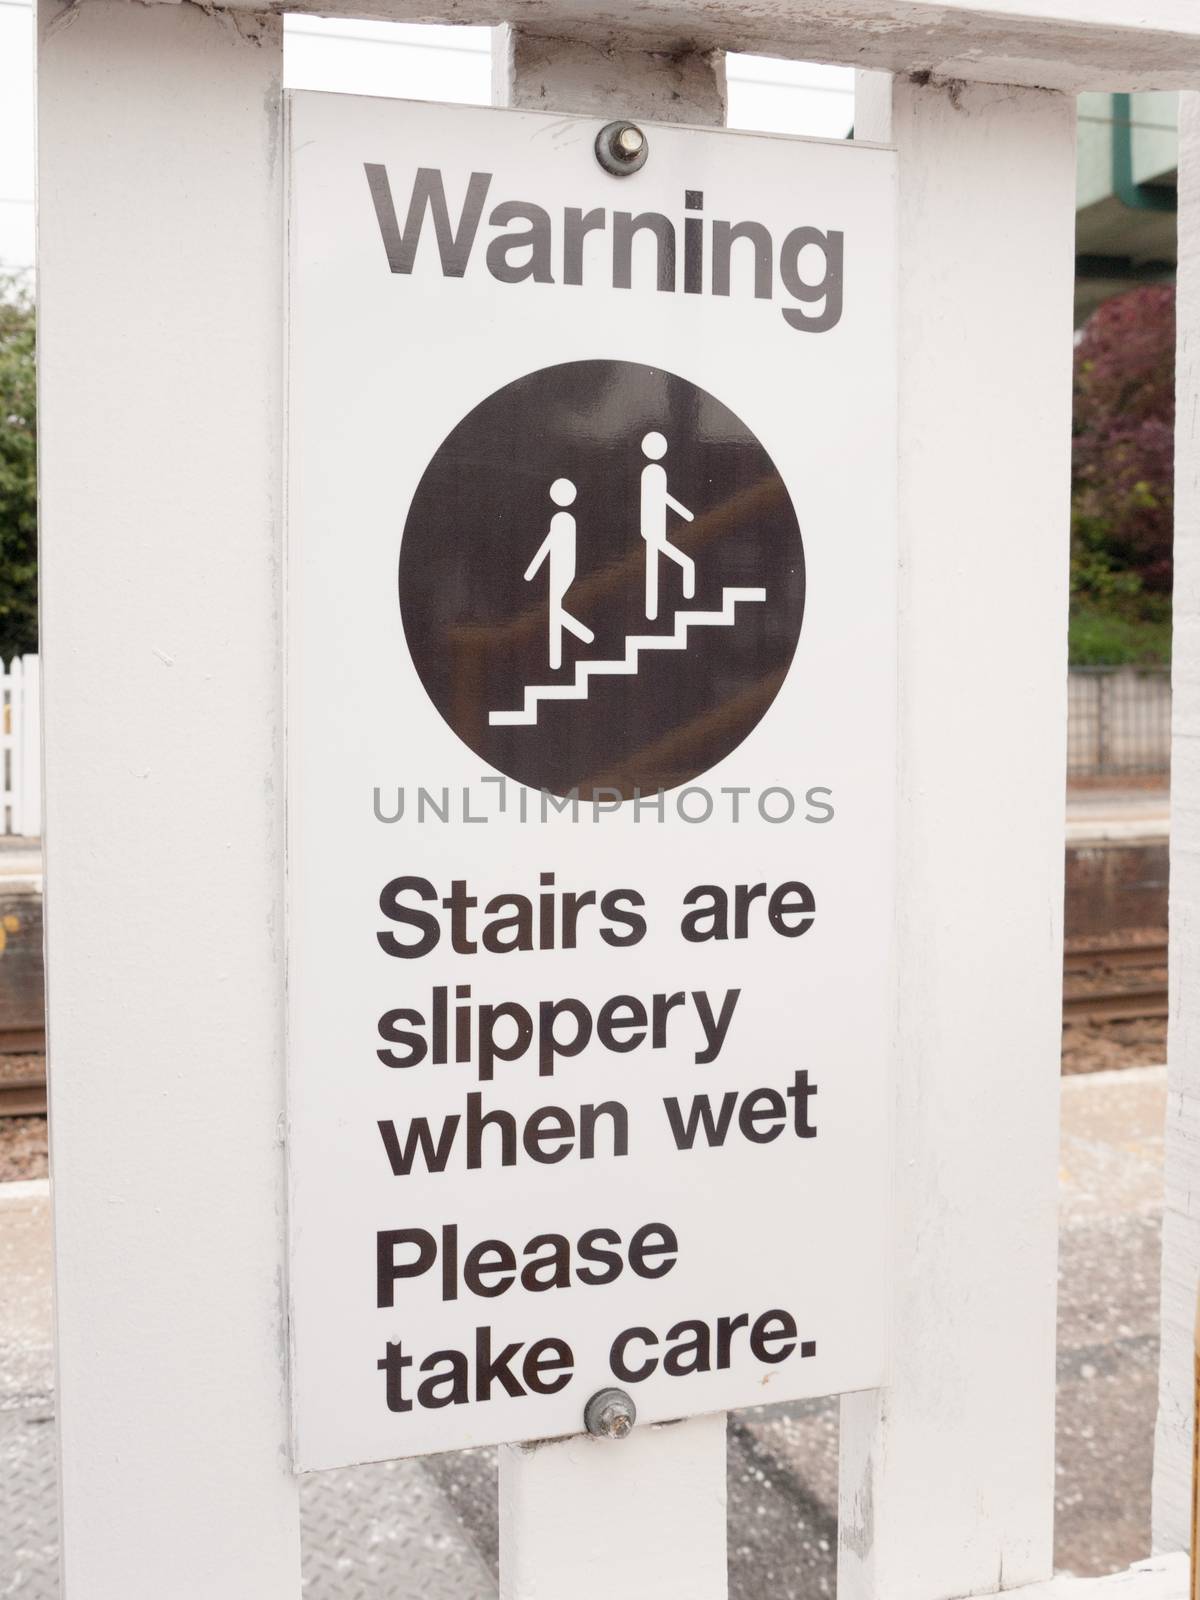 a warning sign saying stairs are slippery when wet please take care near train track bridge steps up careful safety caution advisory